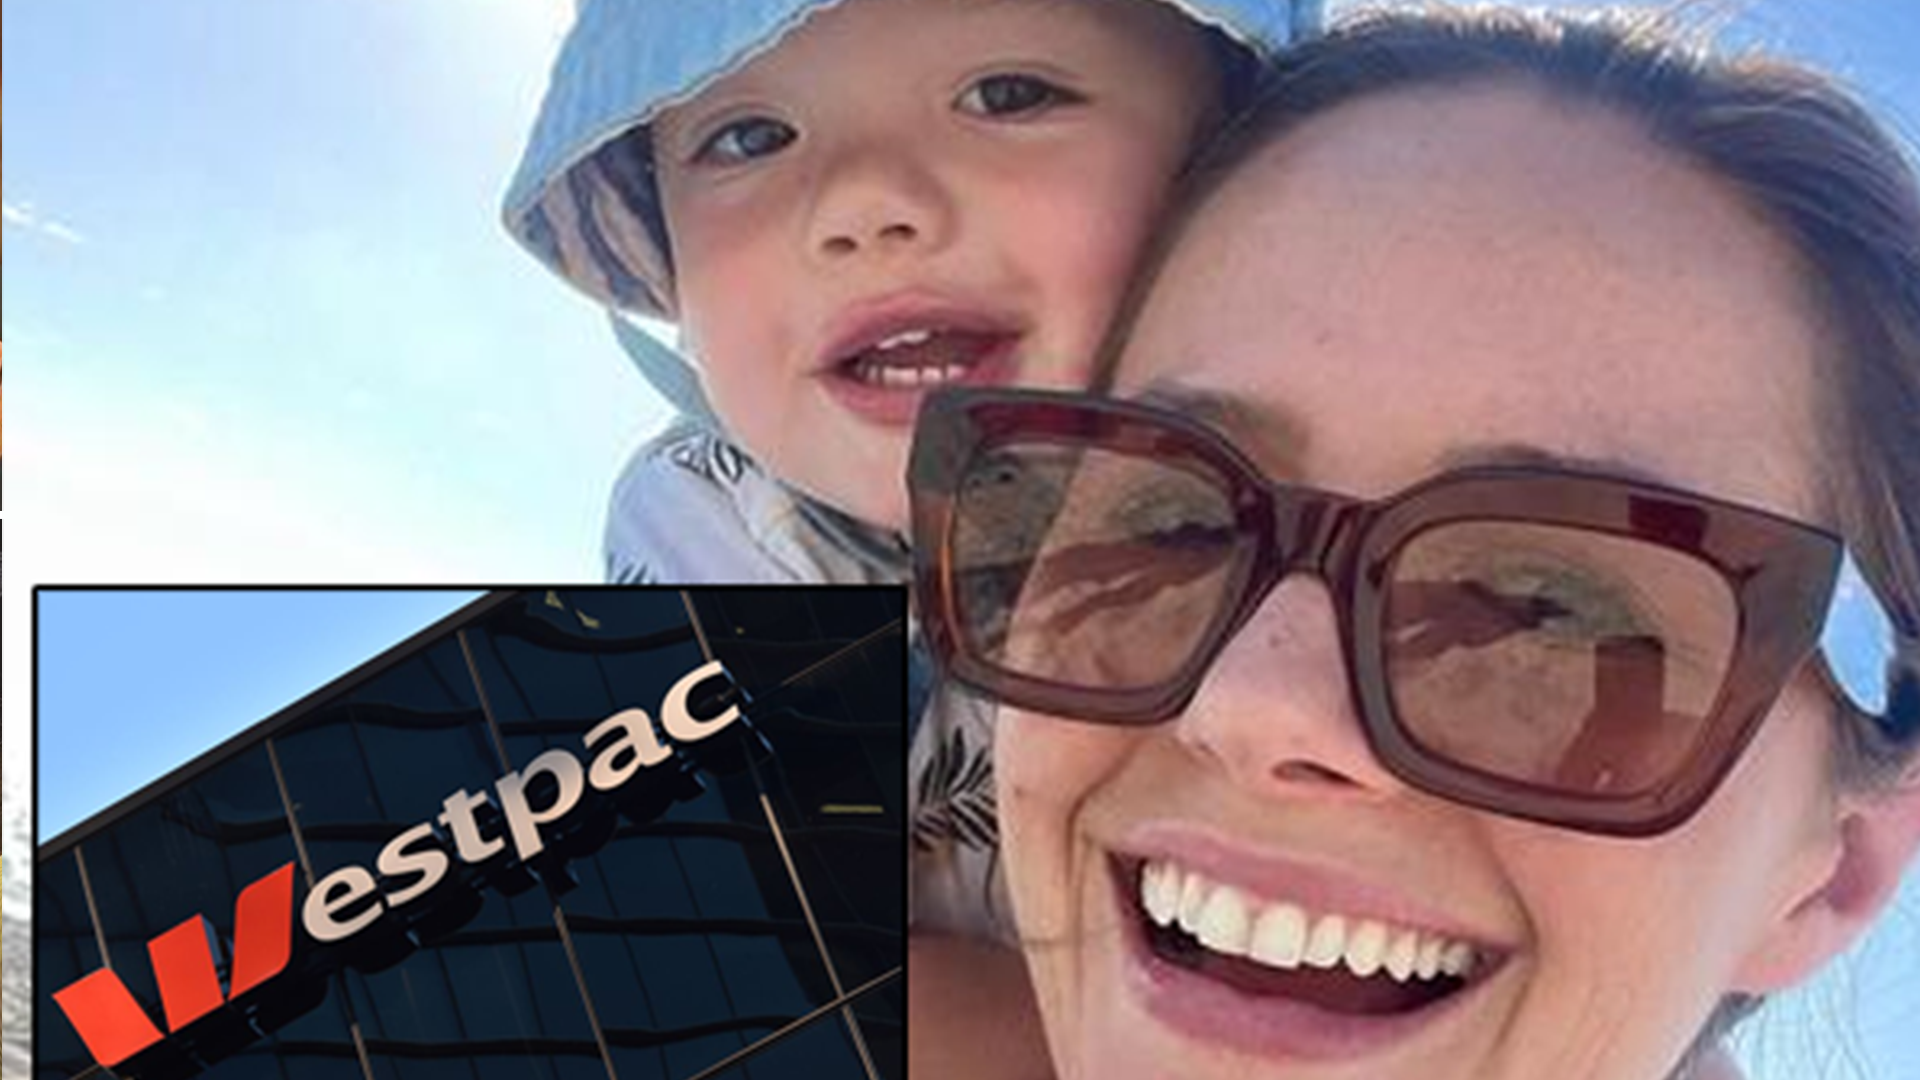 Jessica Ridley was scammed out of $35,000 by a fake Westpac employee